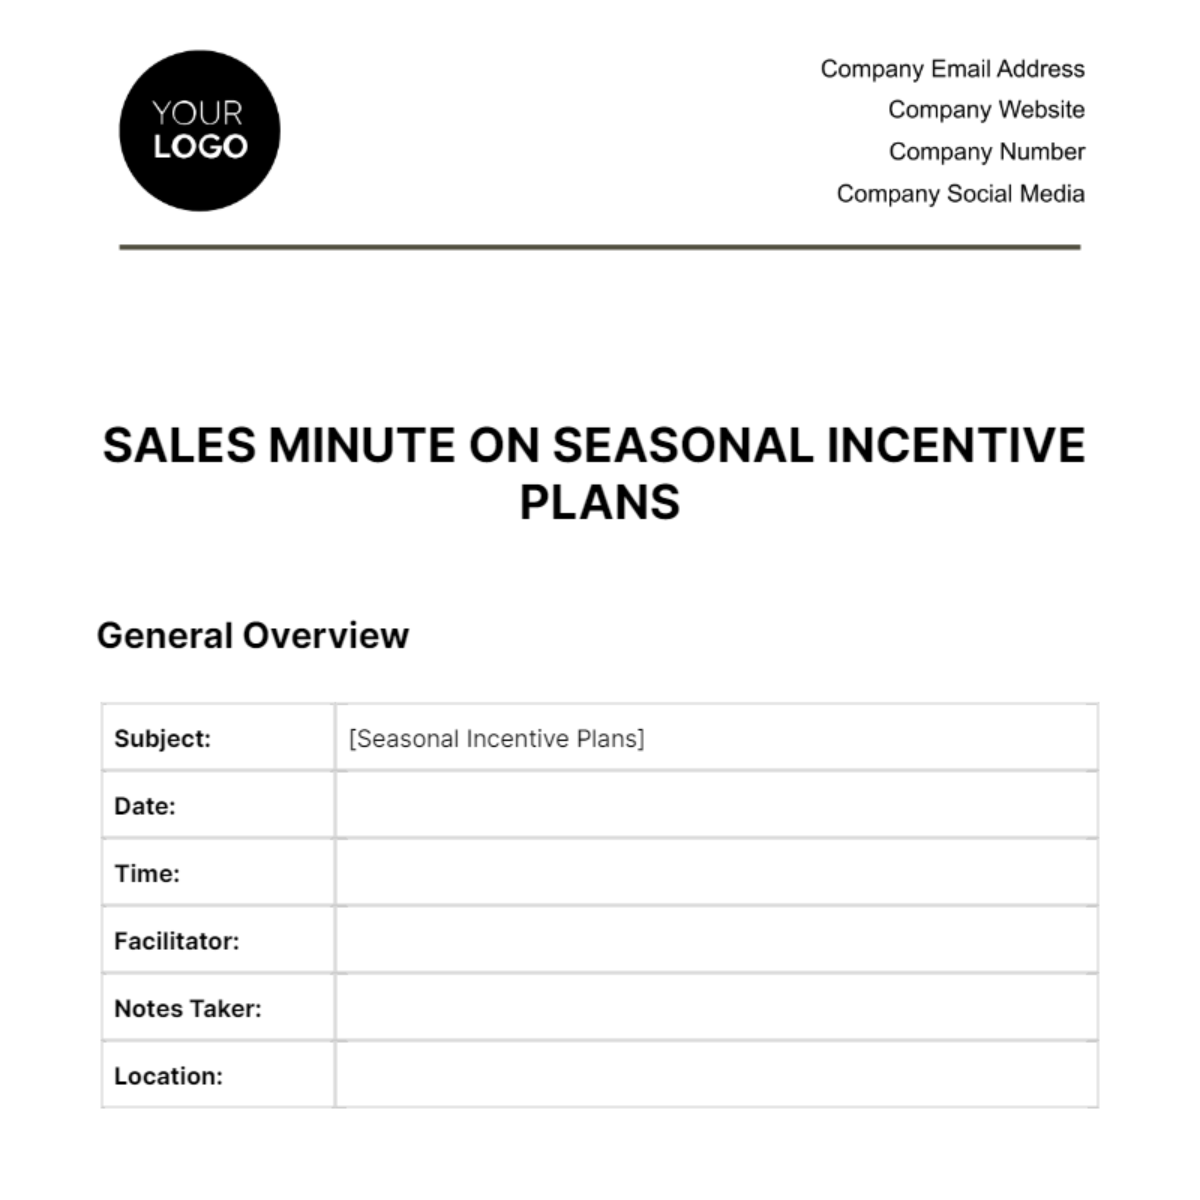 Sales Minute on Seasonal Incentive Plans Template